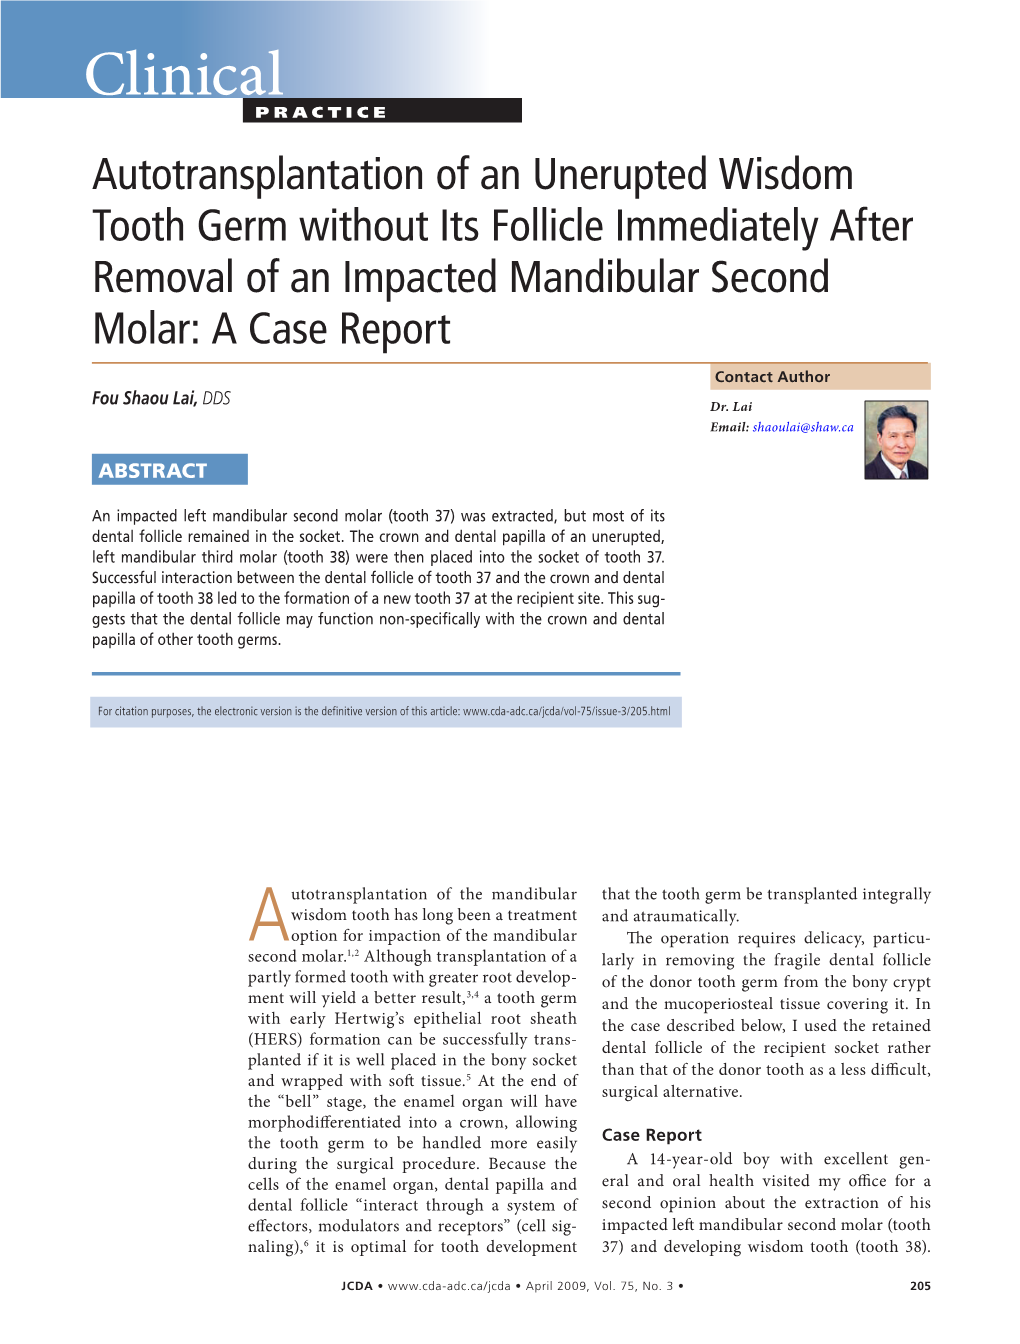 Autotransplantation of an Unerupted Wisdom Tooth Germ Without Its